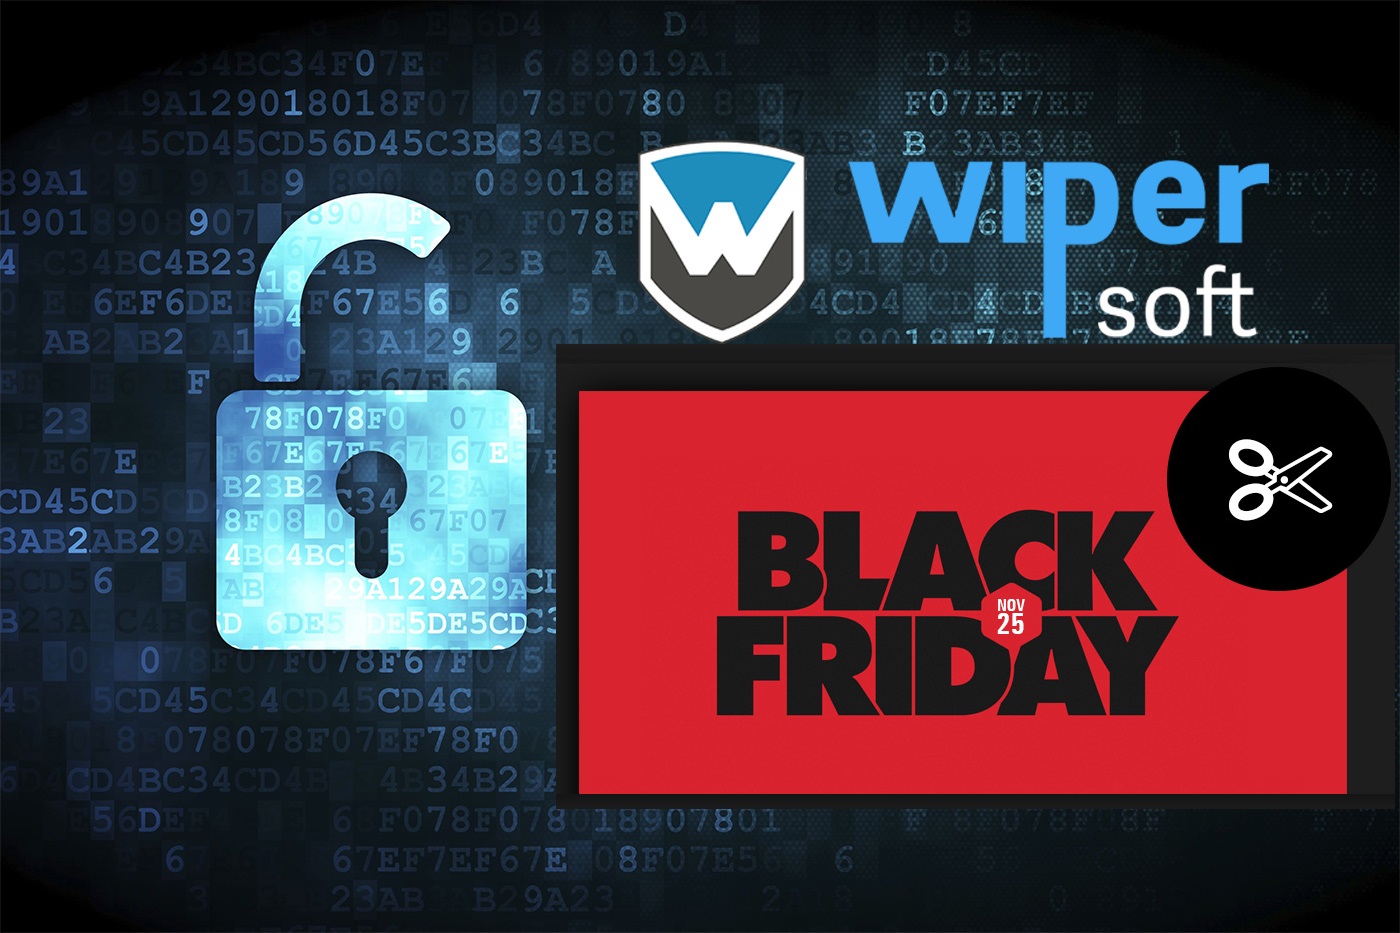 Beware of fraudulent Black Friday Cyber Monday apps